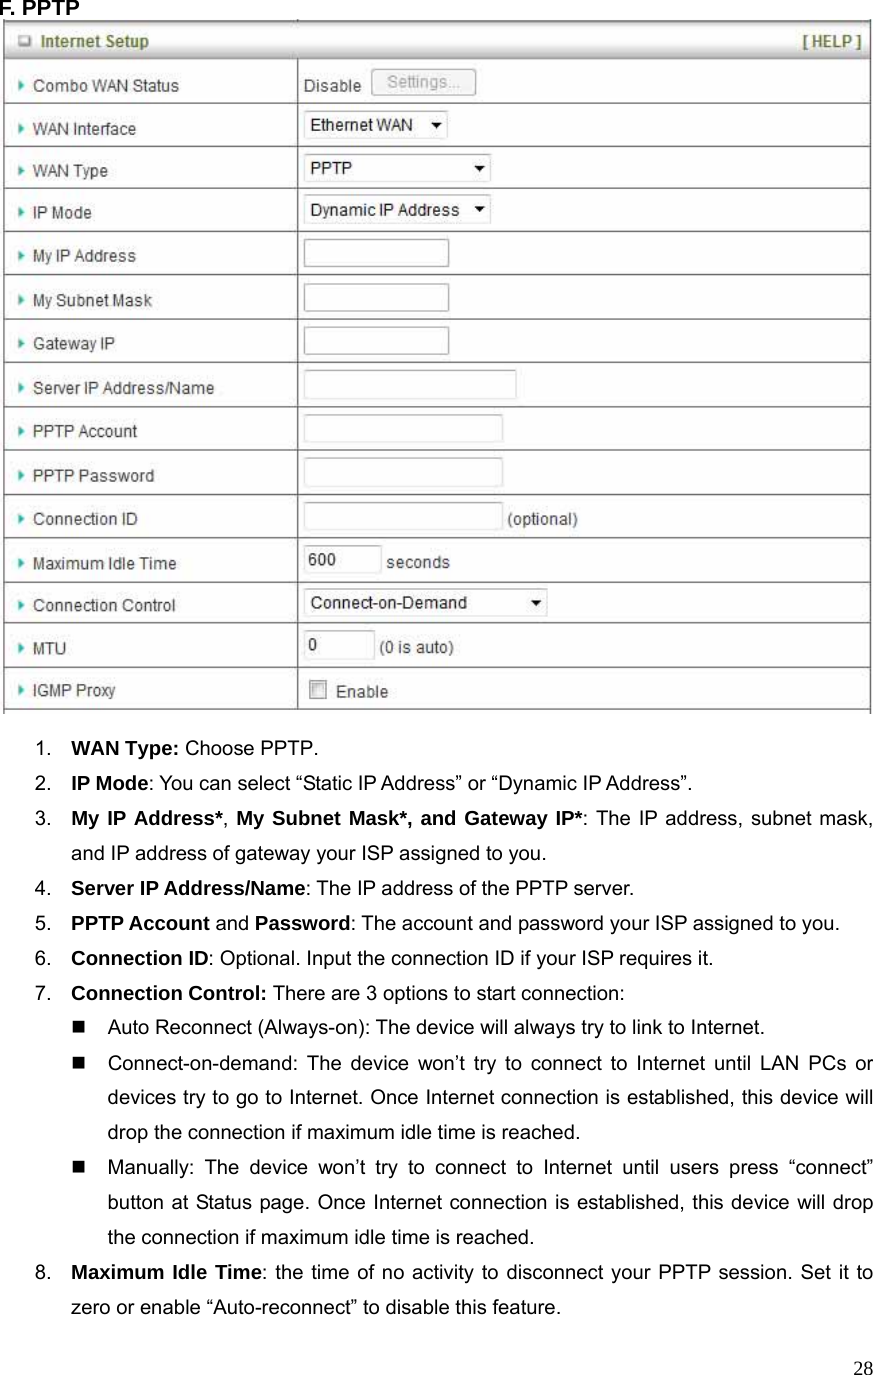  28F. PPTP     1.  WAN Type: Choose PPTP. 2.  IP Mode: You can select “Static IP Address” or “Dynamic IP Address”.   3.  My IP Address*, My Subnet Mask*, and Gateway IP*: The IP address, subnet mask, and IP address of gateway your ISP assigned to you.   4.  Server IP Address/Name: The IP address of the PPTP server. 5.  PPTP Account and Password: The account and password your ISP assigned to you. 6.  Connection ID: Optional. Input the connection ID if your ISP requires it.   7.  Connection Control: There are 3 options to start connection:     Auto Reconnect (Always-on): The device will always try to link to Internet.       Connect-on-demand: The device won’t try to connect to Internet until LAN PCs or devices try to go to Internet. Once Internet connection is established, this device will drop the connection if maximum idle time is reached.   Manually: The device won’t try to connect to Internet until users press “connect” button at Status page. Once Internet connection is established, this device will drop the connection if maximum idle time is reached. 8.  Maximum Idle Time: the time of no activity to disconnect your PPTP session. Set it to zero or enable “Auto-reconnect” to disable this feature. 